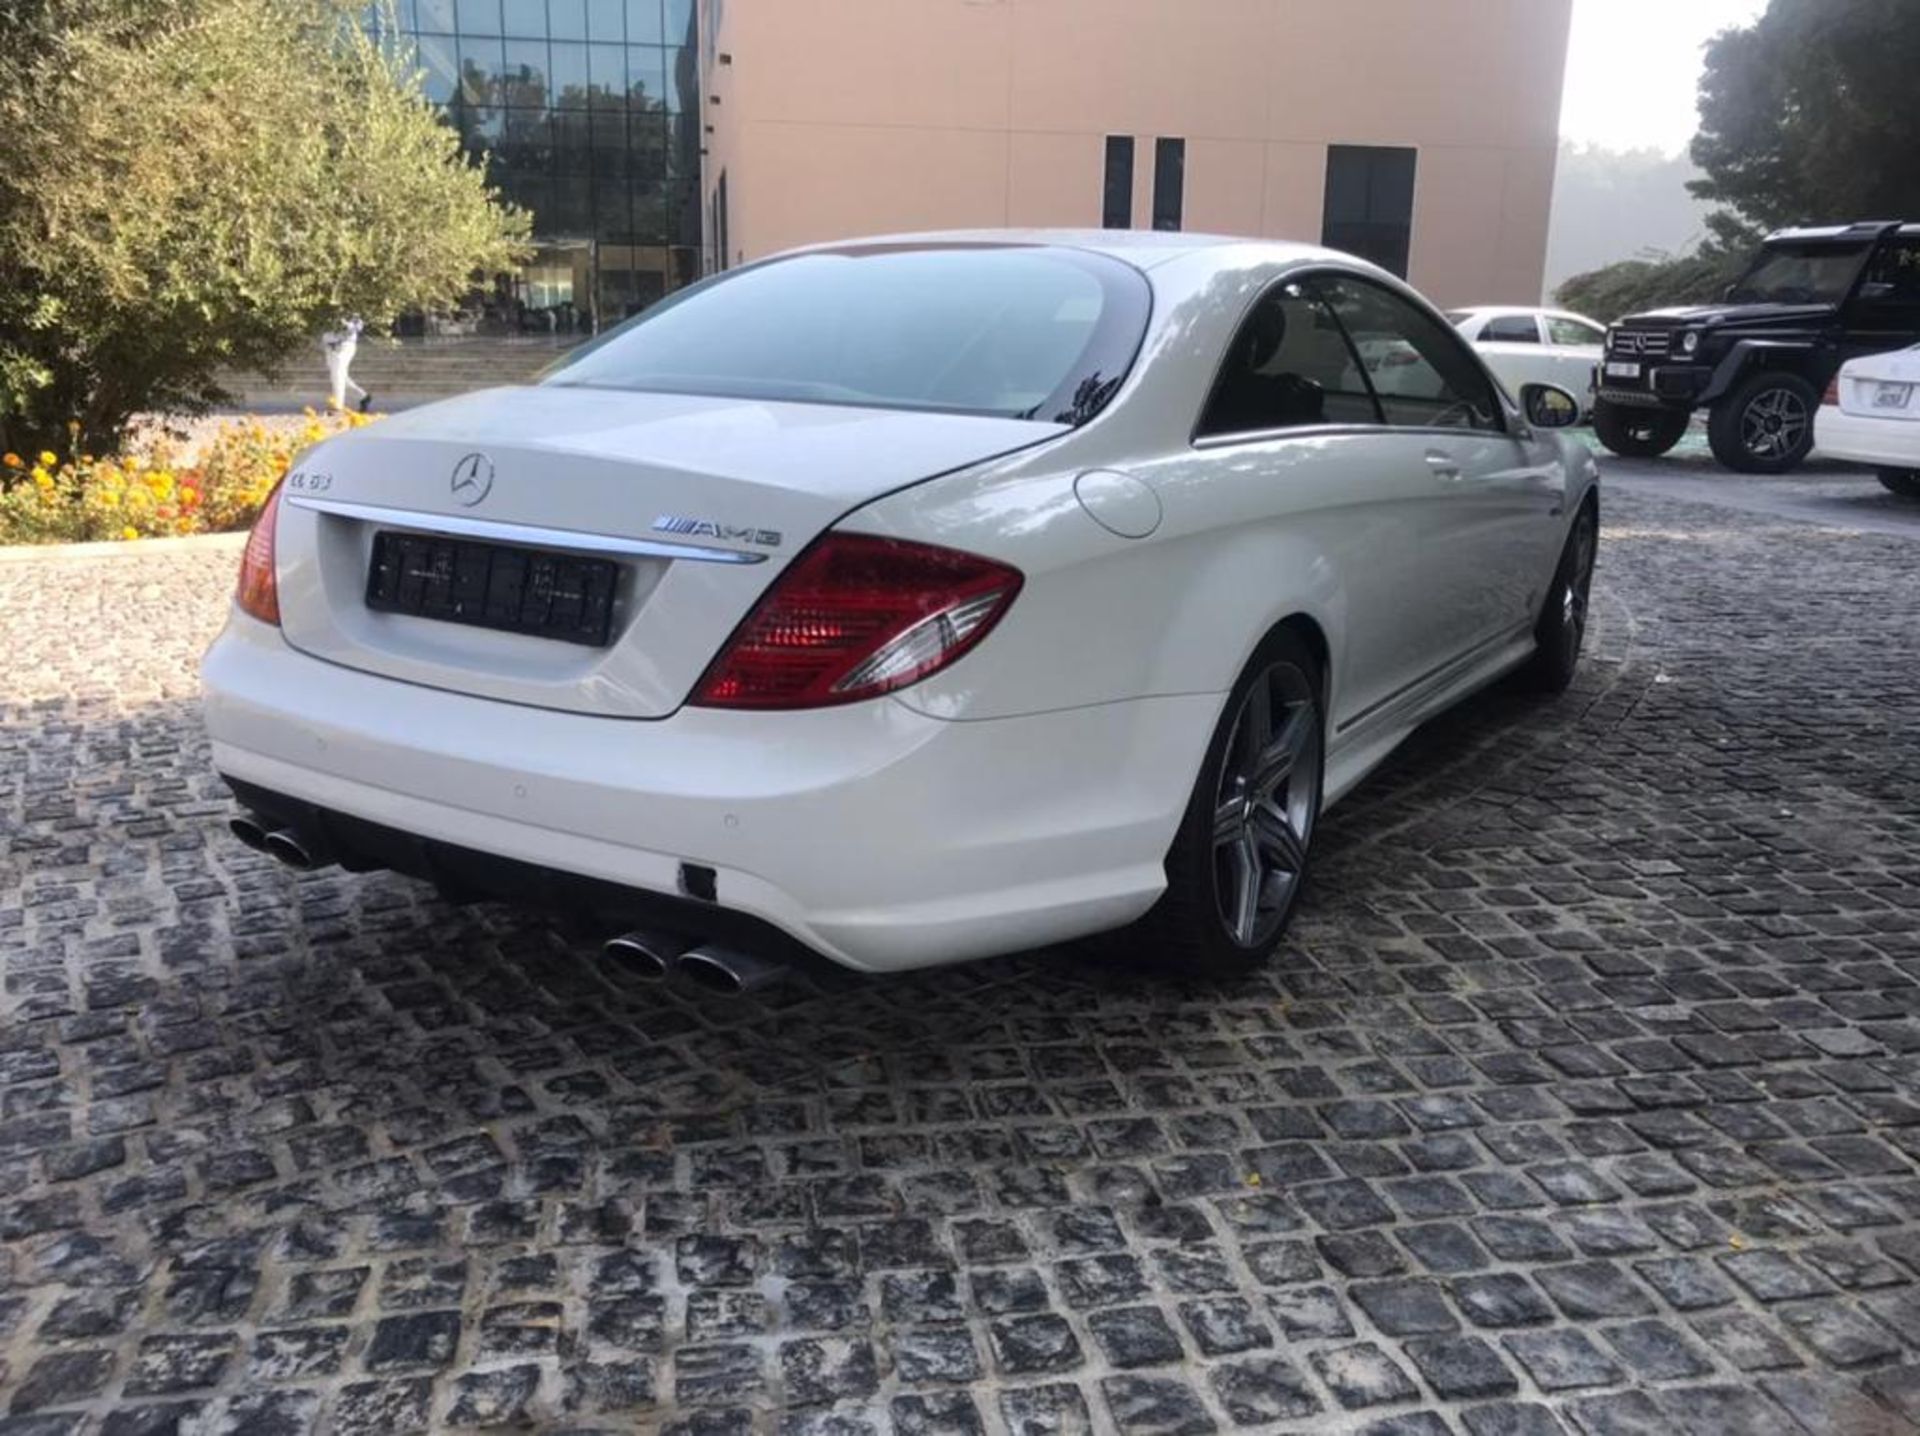 2008 Mercedes CL63 92,000km can export vat free available mid April - Image 4 of 12